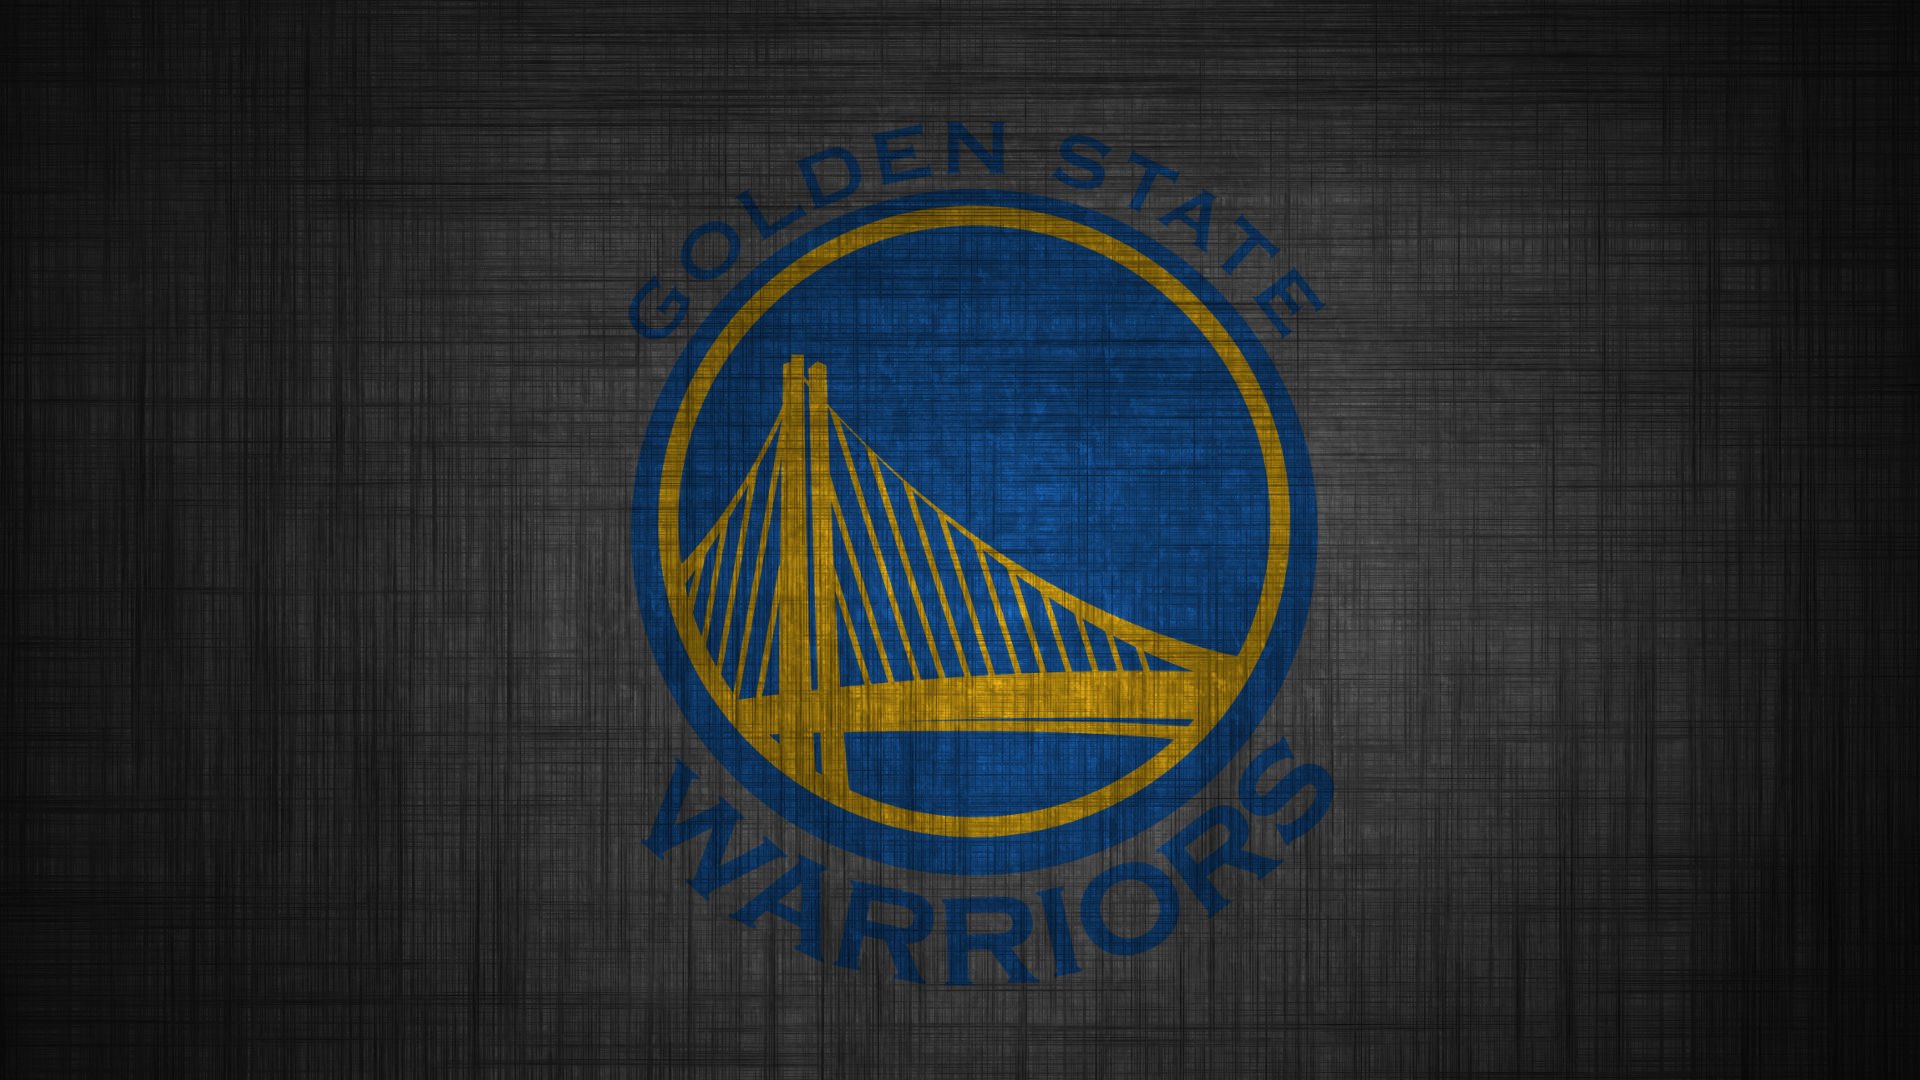 Golden State Warriors Logo Wallpaper Image Photo Picture